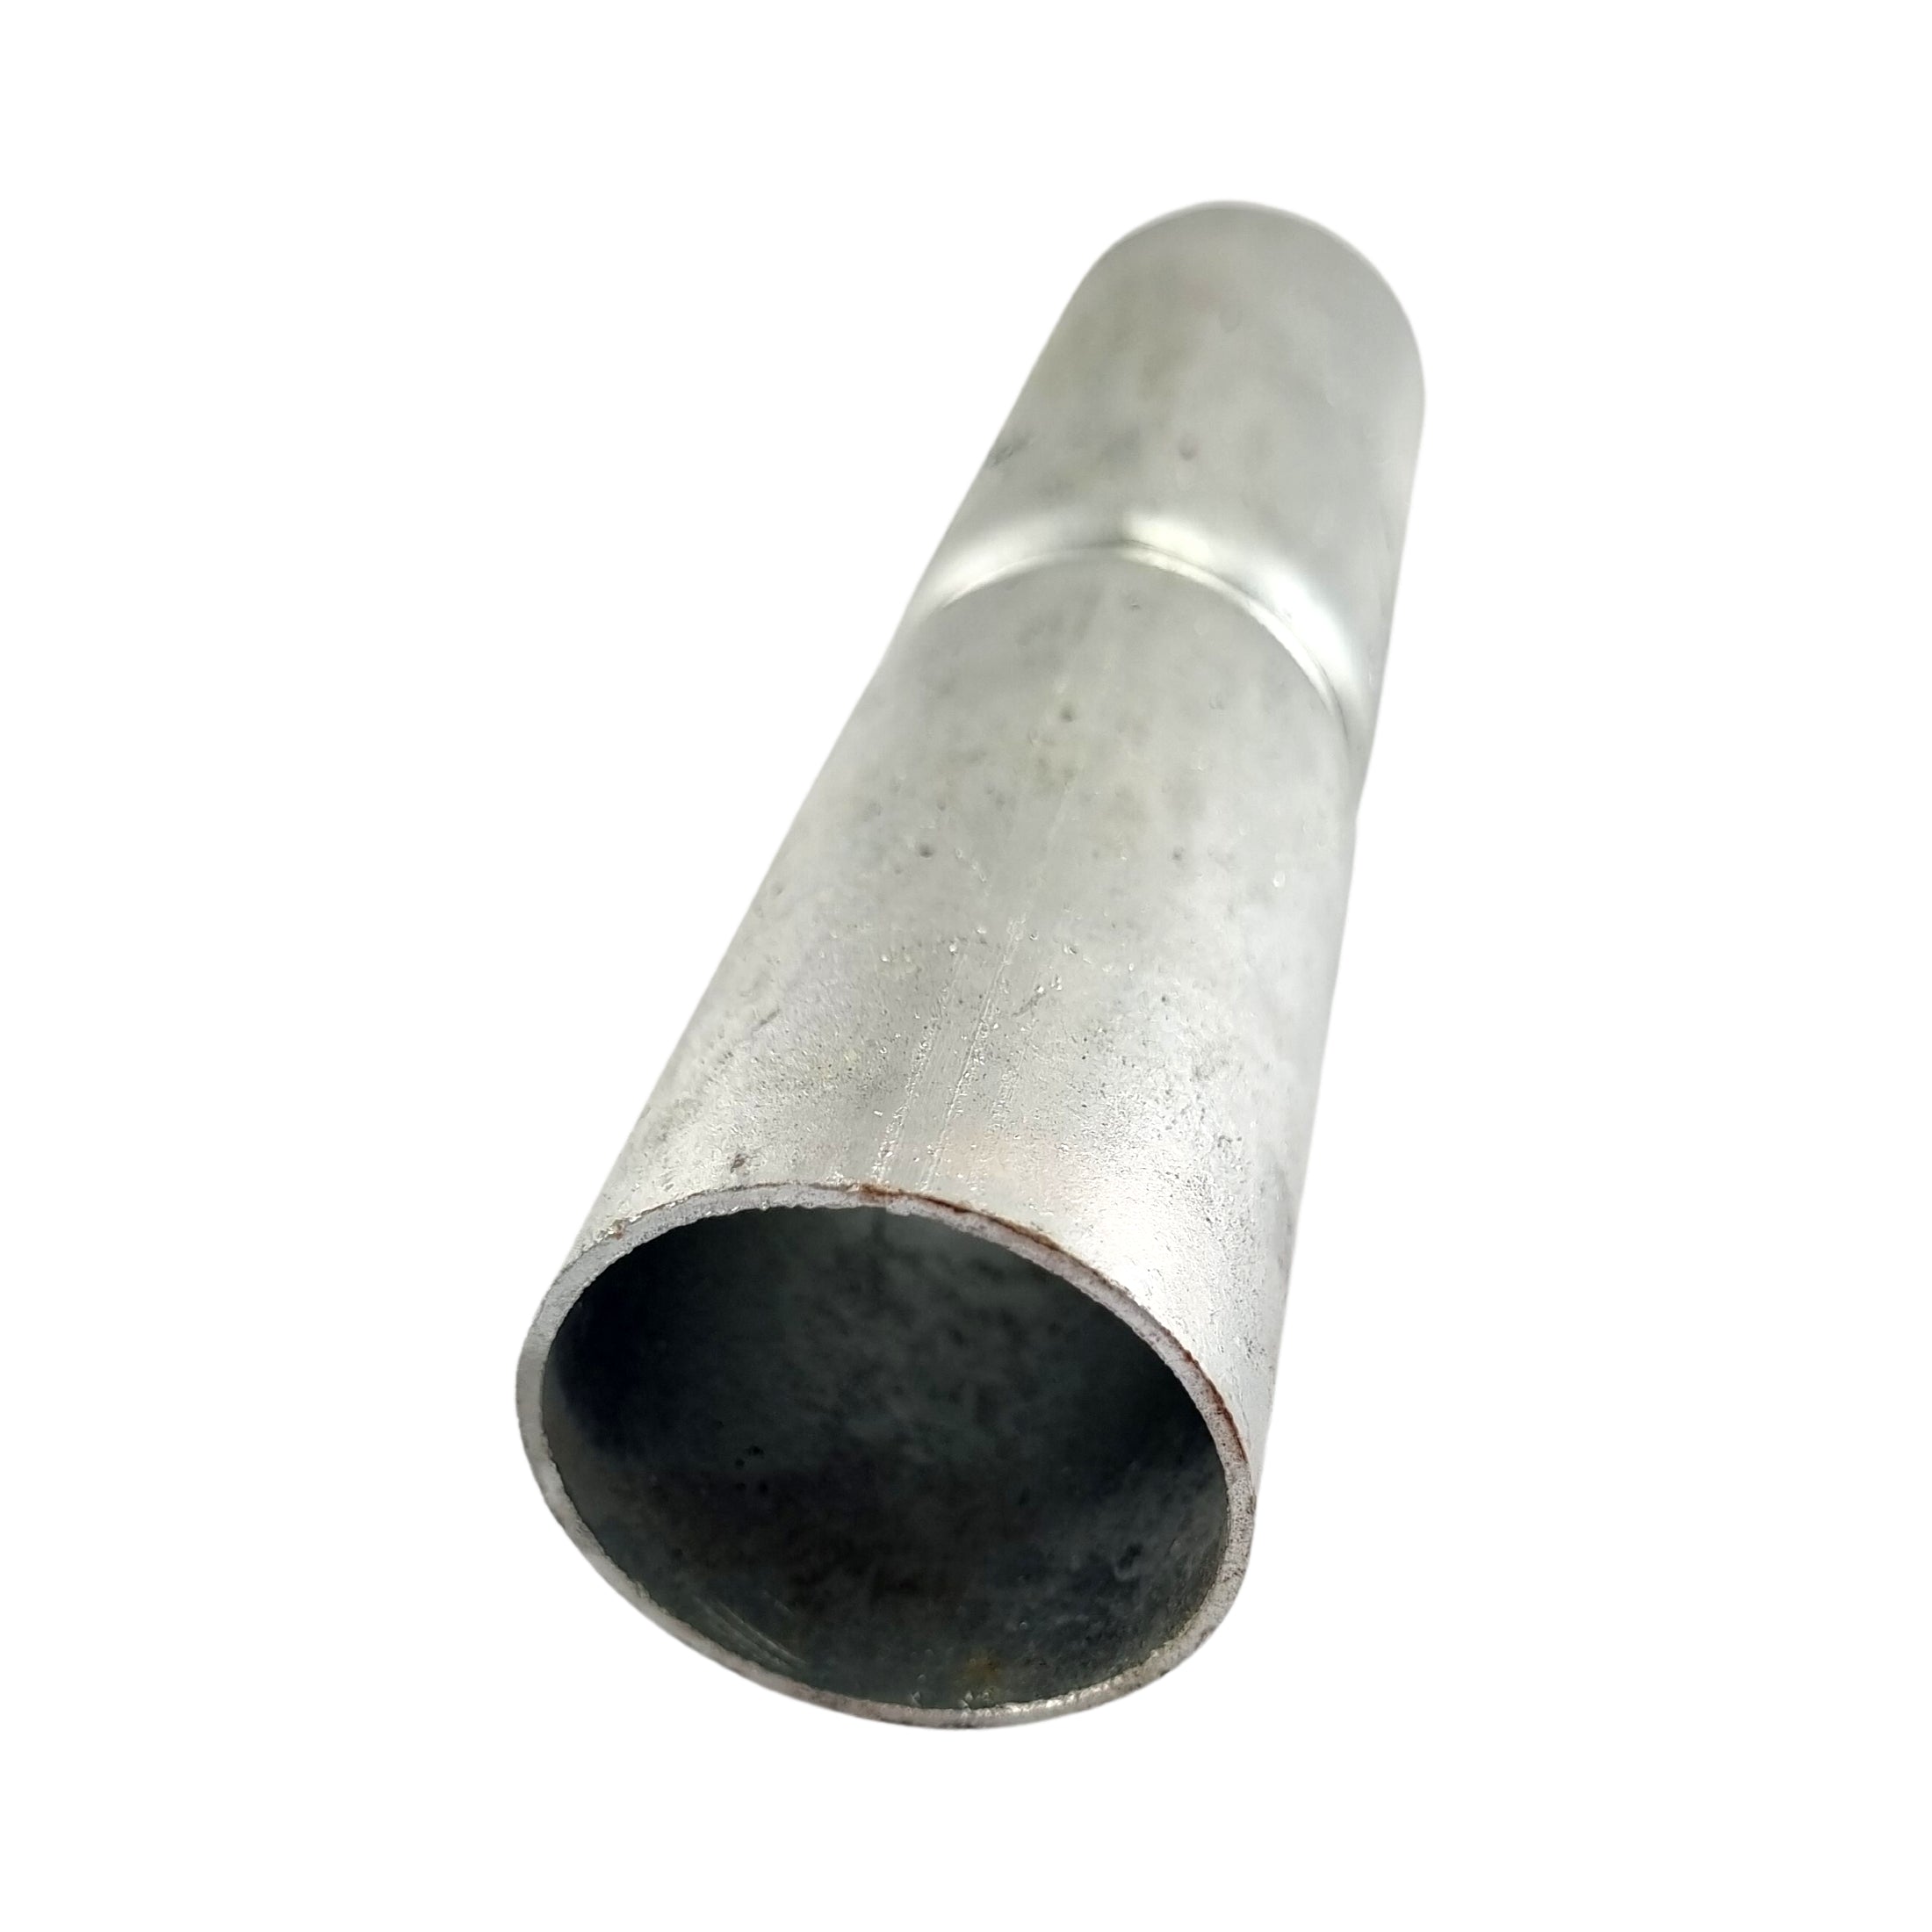 Speedee Sleeve - External Pipe Joiner Galvanised. Various sizes. Shop Fence & Gate Fittings online at chain.com.au. Shipping Australia wide.